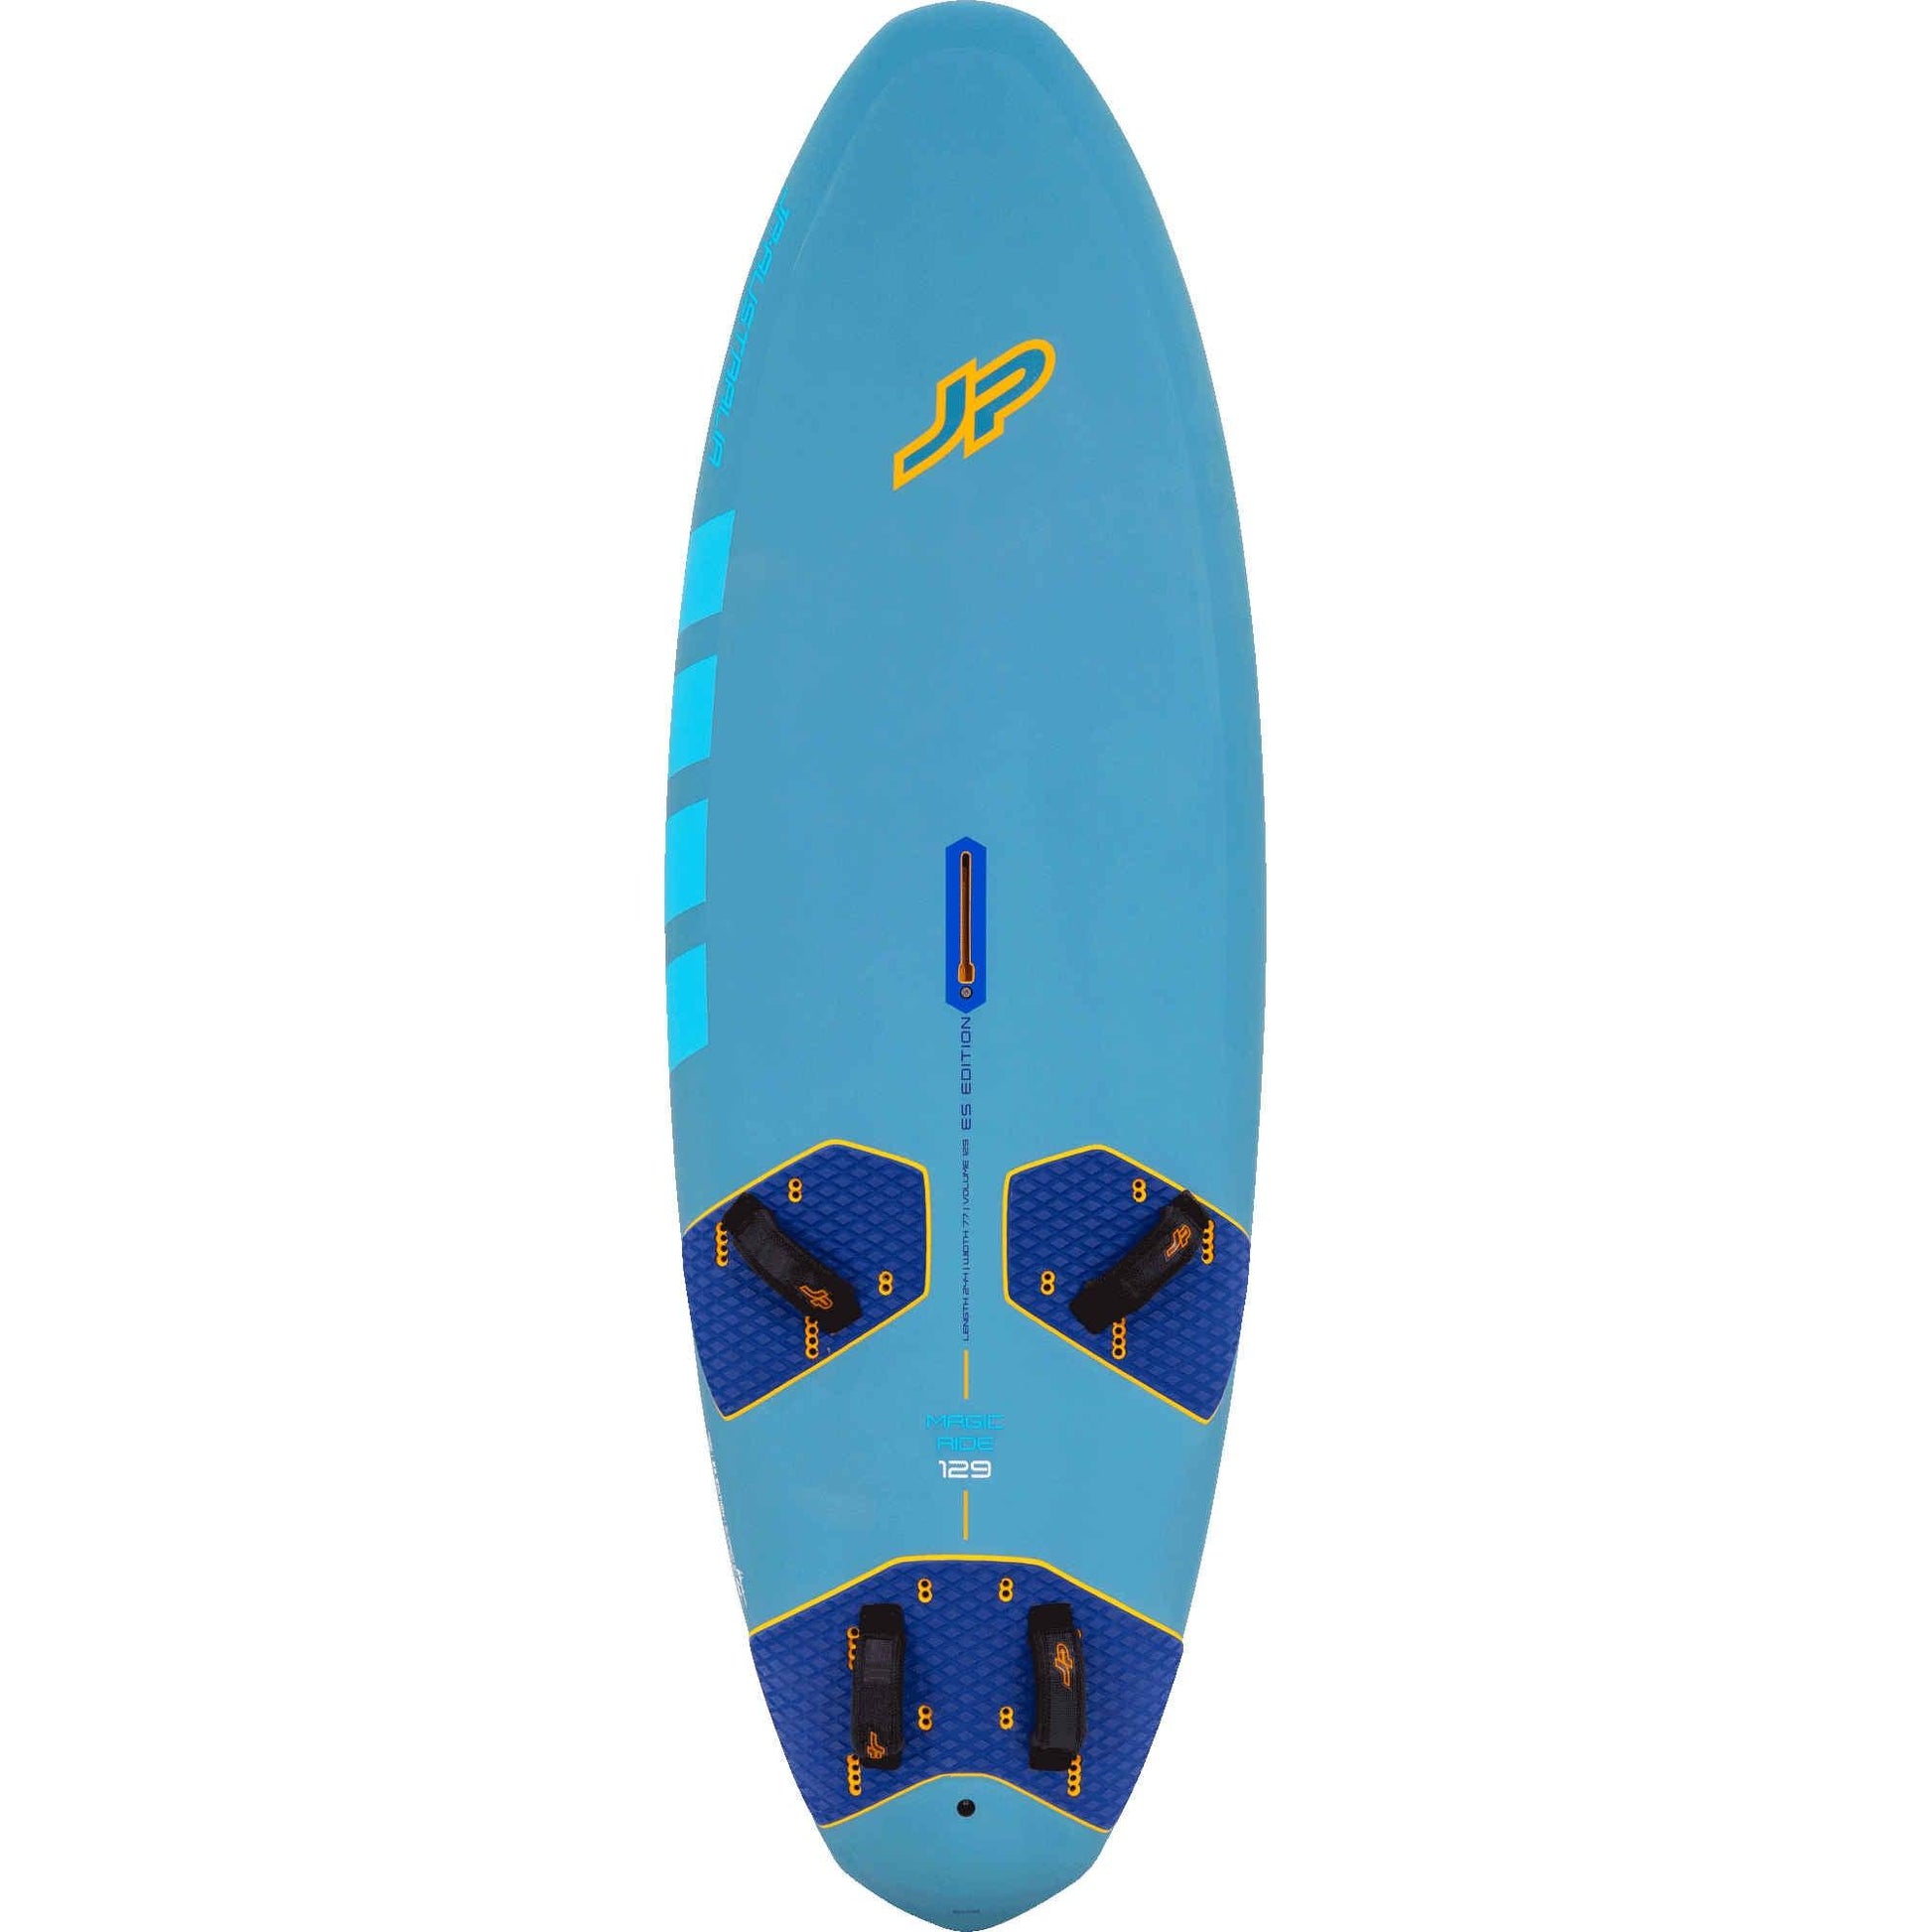 JP Magic Ride 2022 Board - Poole Harbour Watersports